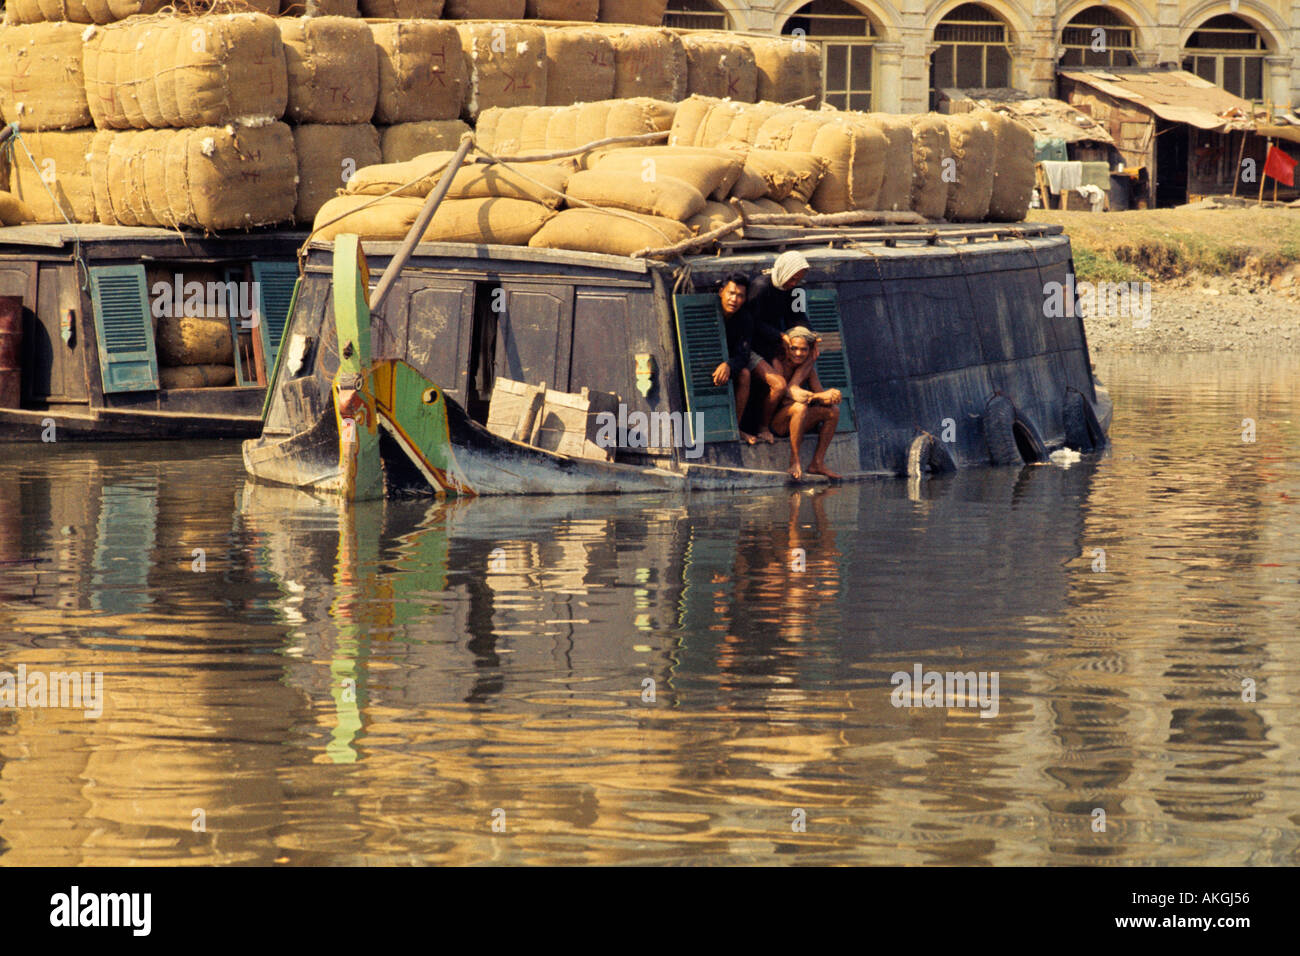 Cotton bales on boat in a Vietnamese canal Stock Photo